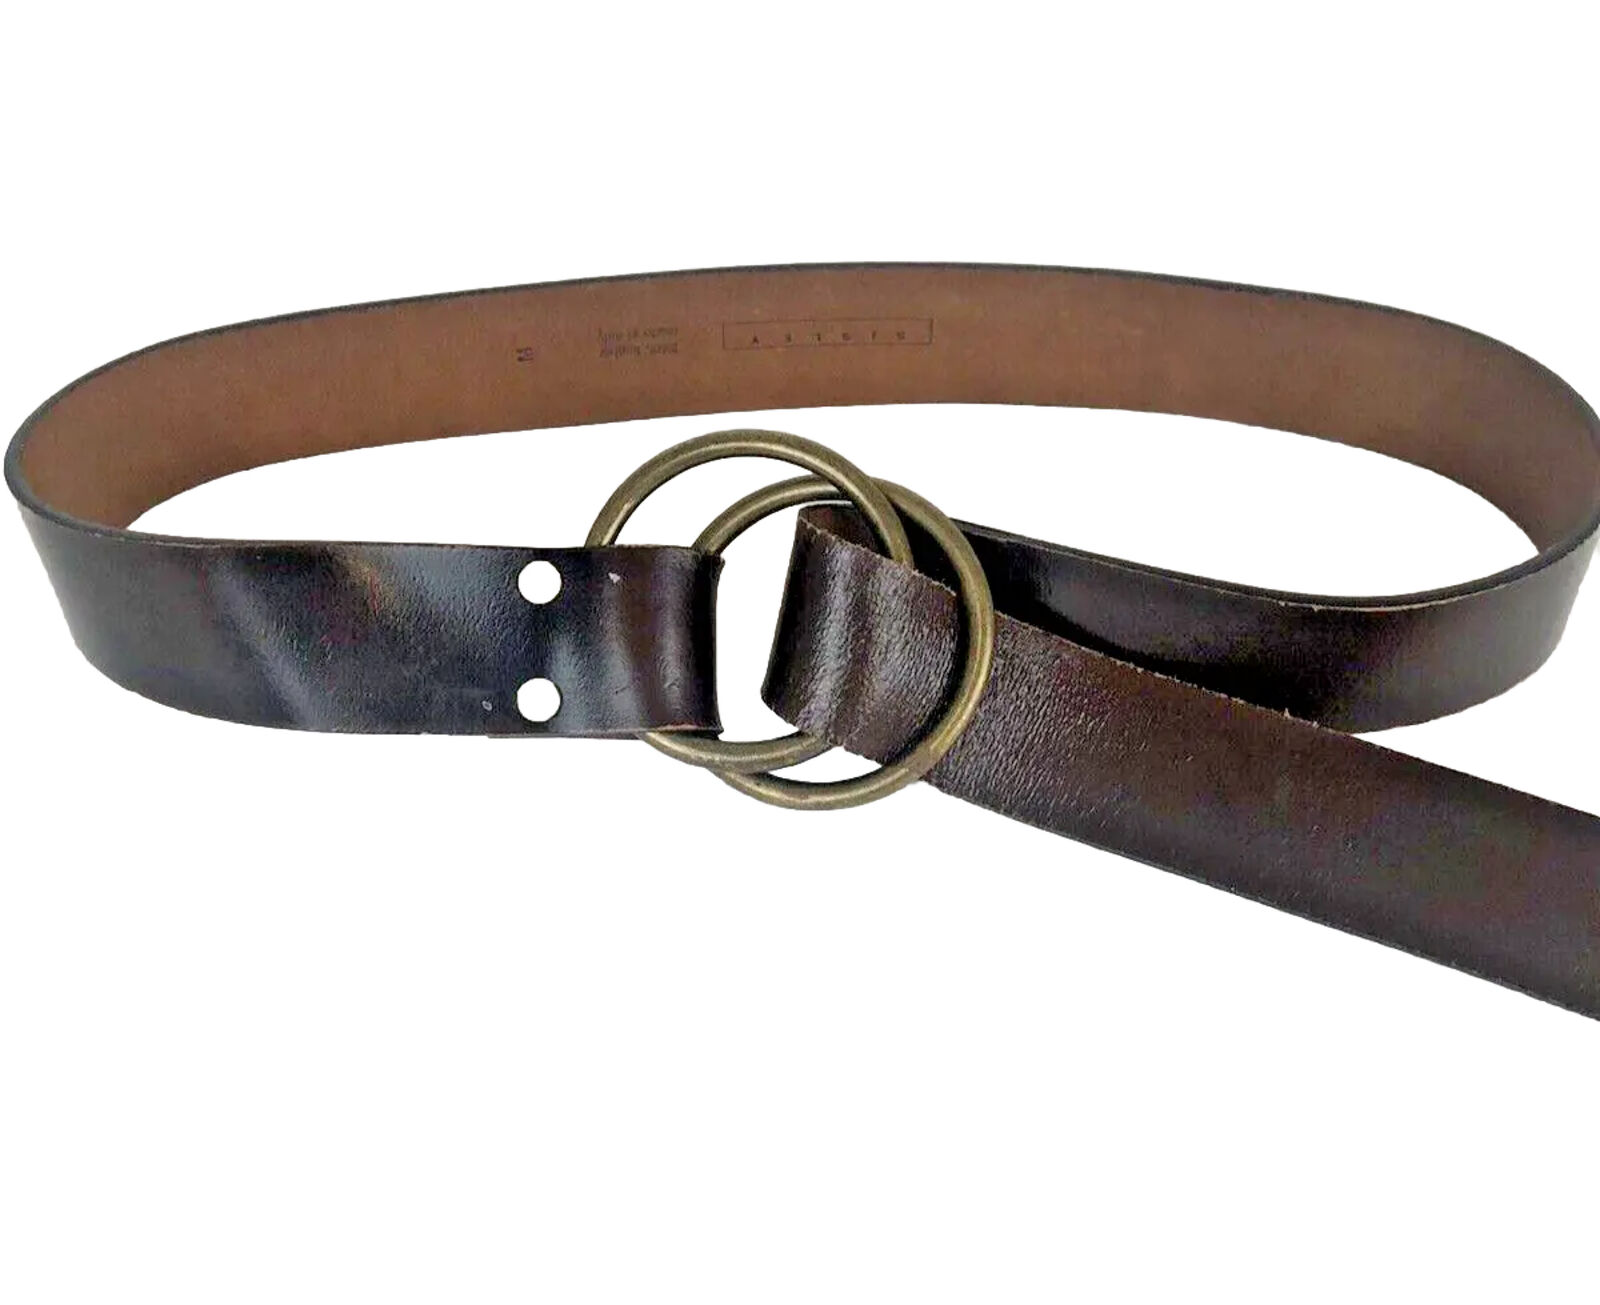 Vintage Sisley Womens M Belt Leather Made in Italy 36-38” Double Brass Rings